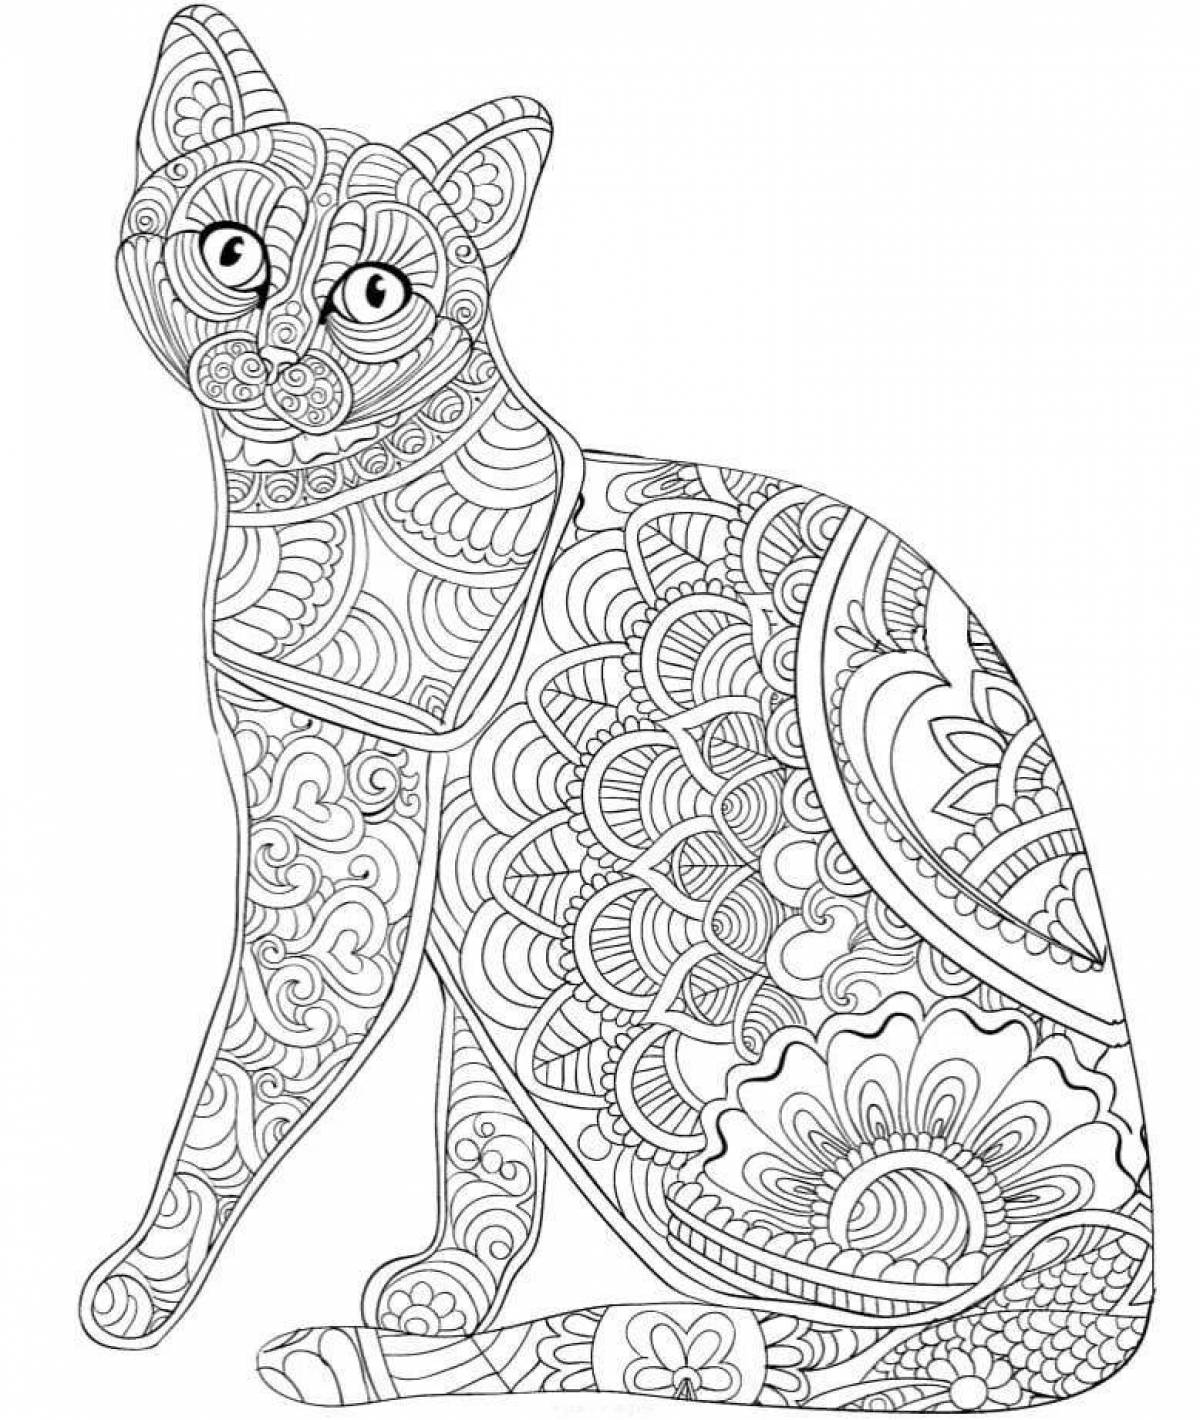 Adorable Animal Coloring Page with Pattern